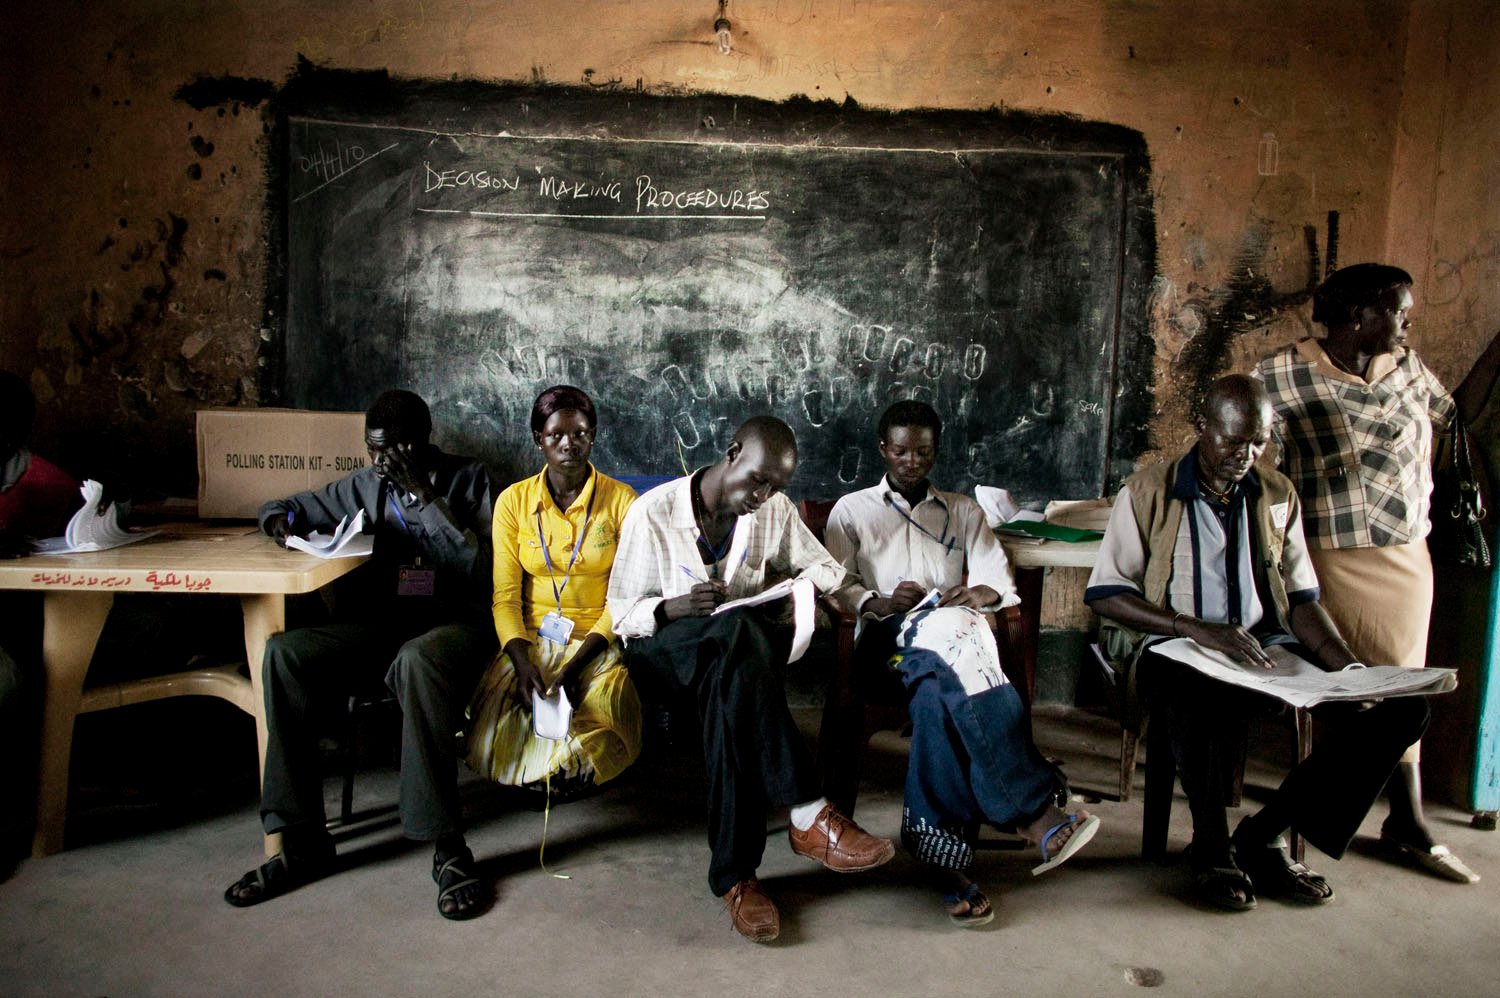  Southern Sudanese election observers and political party agents sit inside a polling station in Juba, southern Sudan during the country's historic presidential, parliamentary and gubernatorial elections in April 2010. The elections were the first to